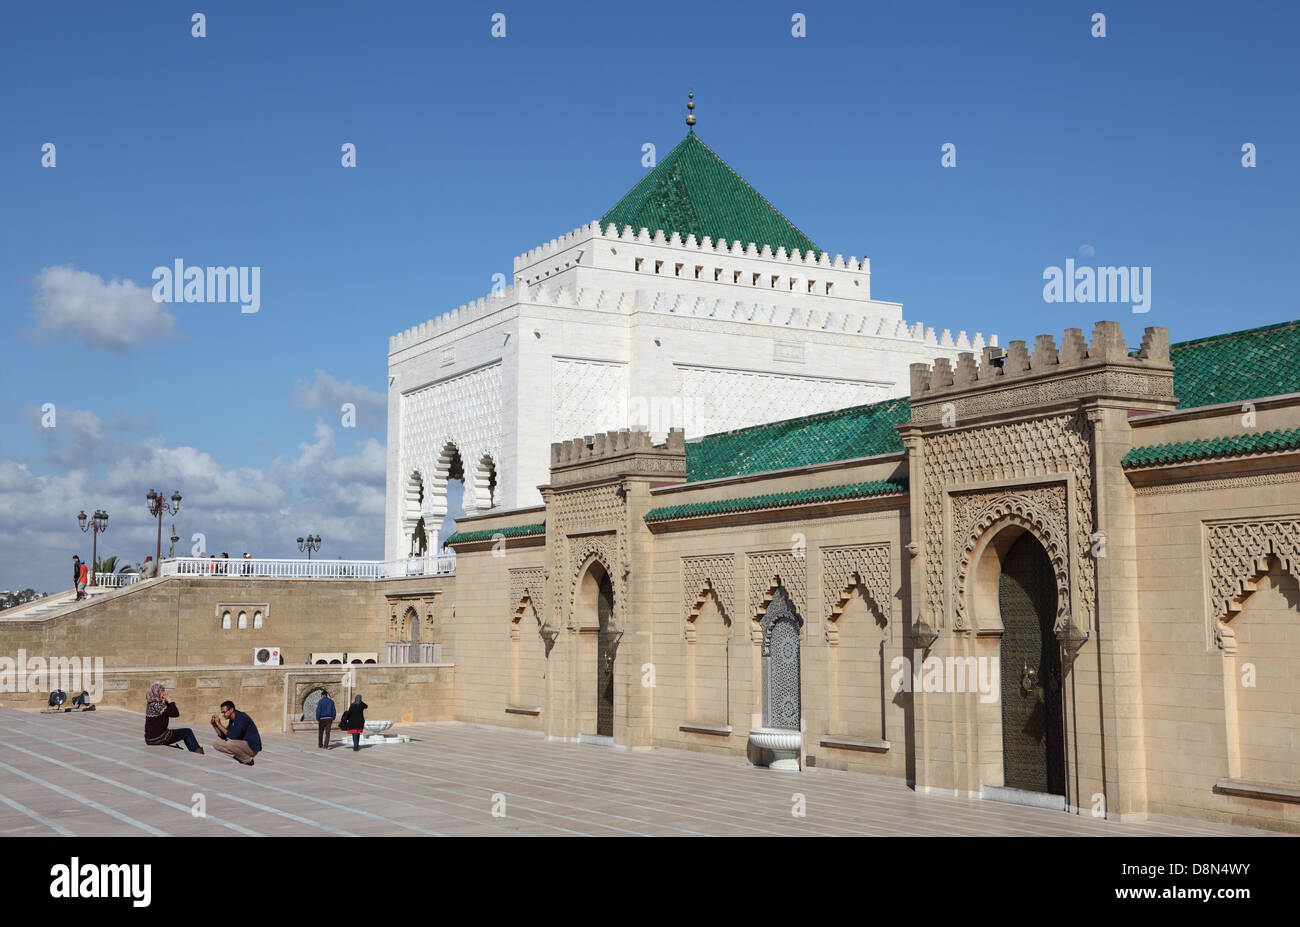 The Mausoleum of Mohammed V in Rabat, Morocco Stock Photo